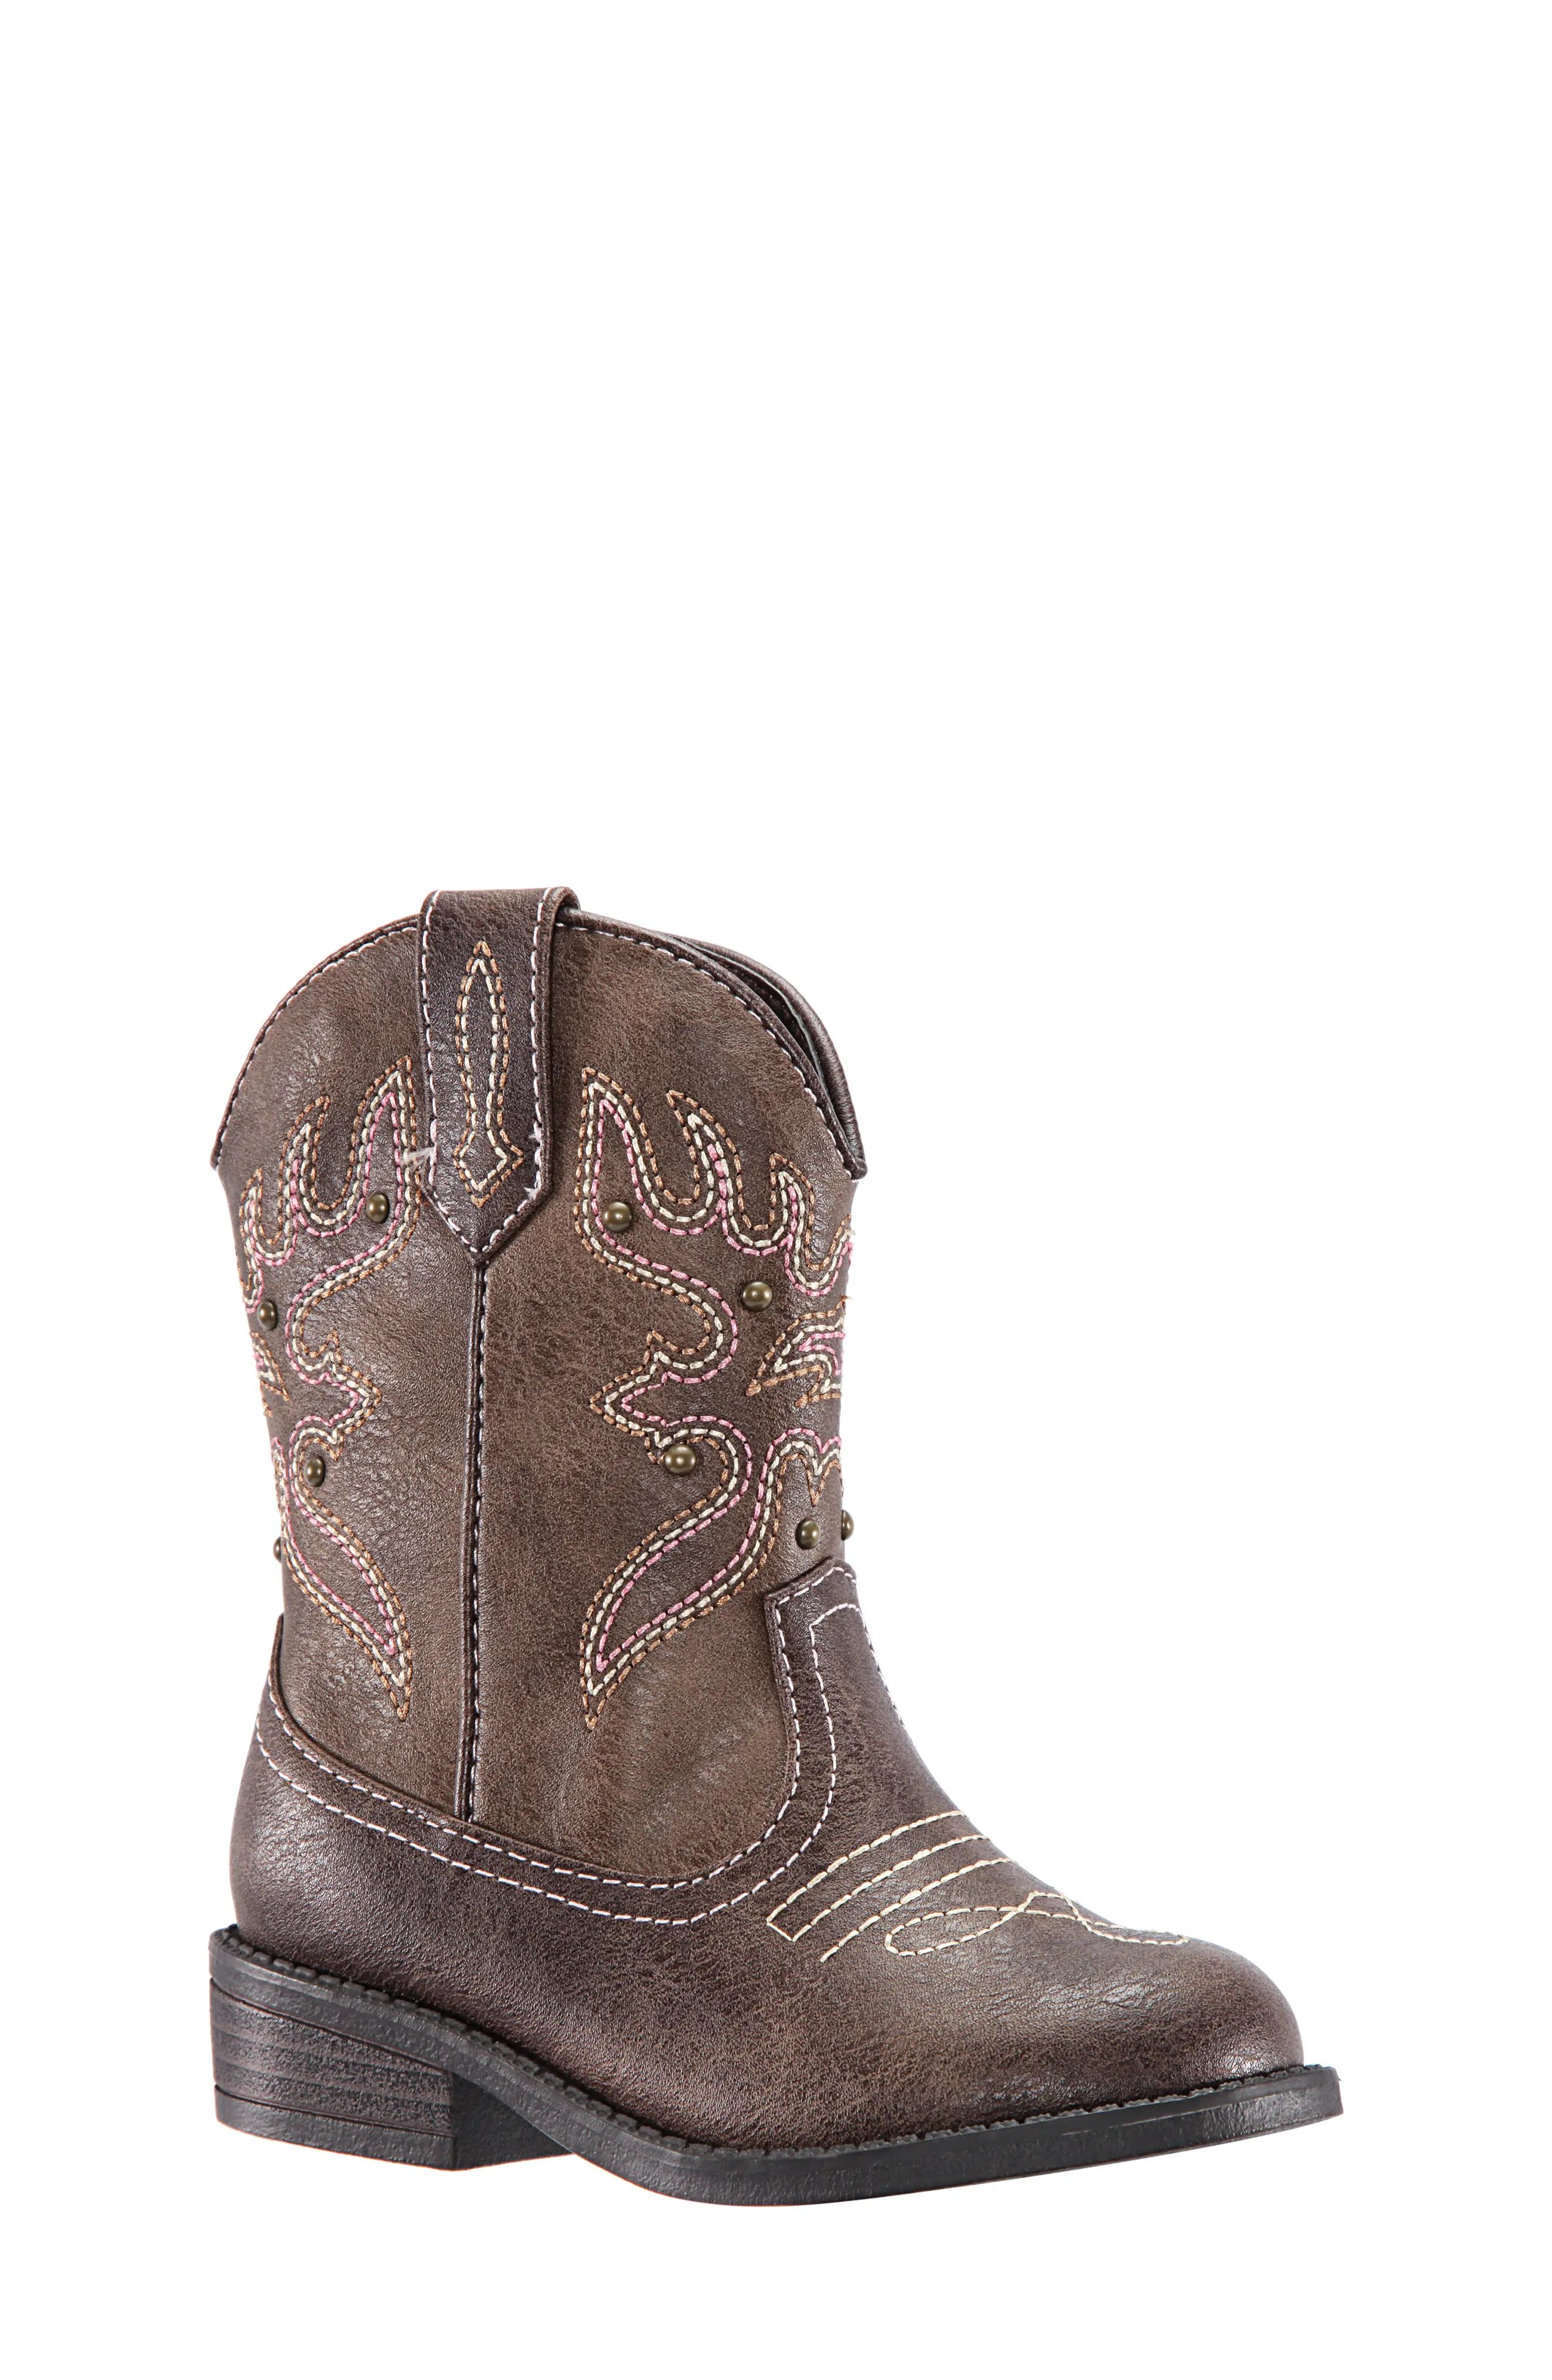 Nina Mirabele Cowboy Boot in Brown at Nordstrom, Size 11 M | Nordstrom